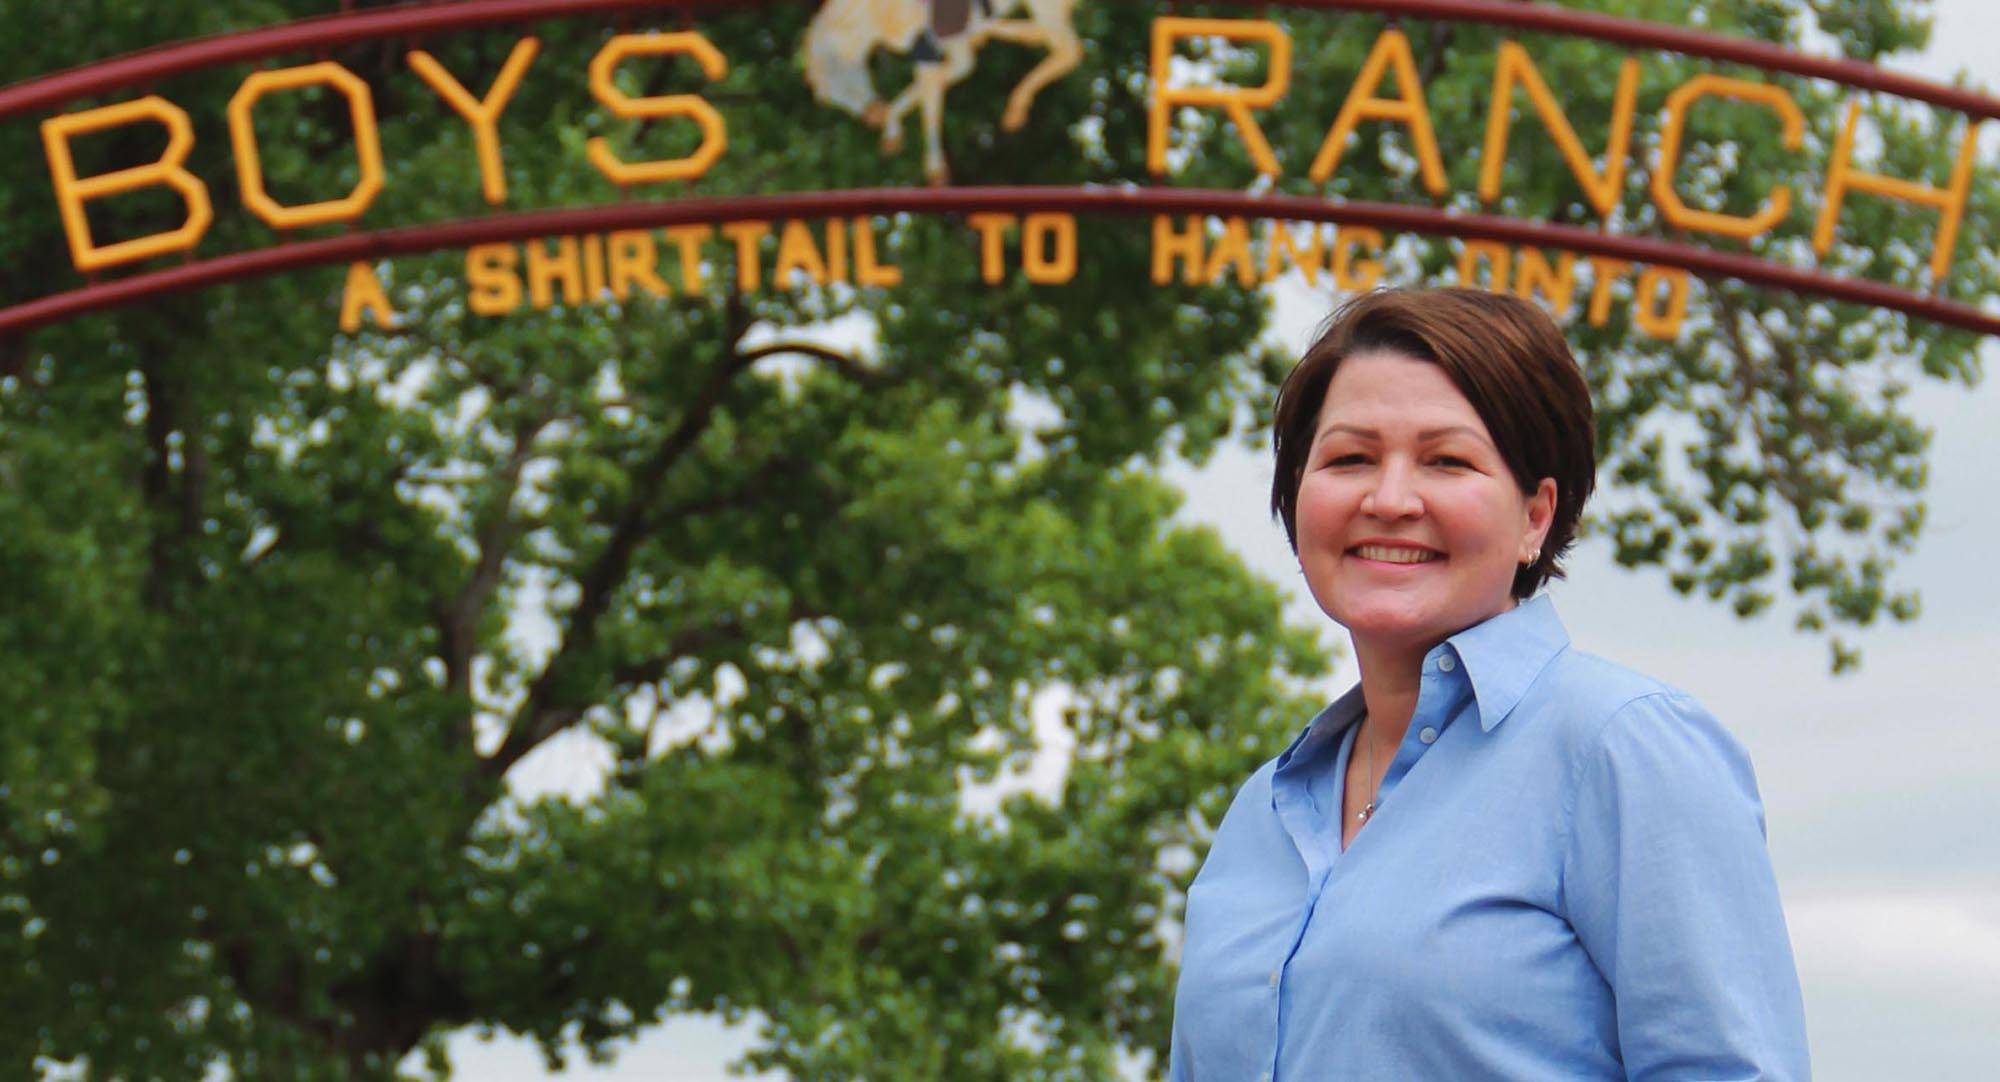 Michelle Maikoetter stands in front of the Boys Ranch entrance gate.